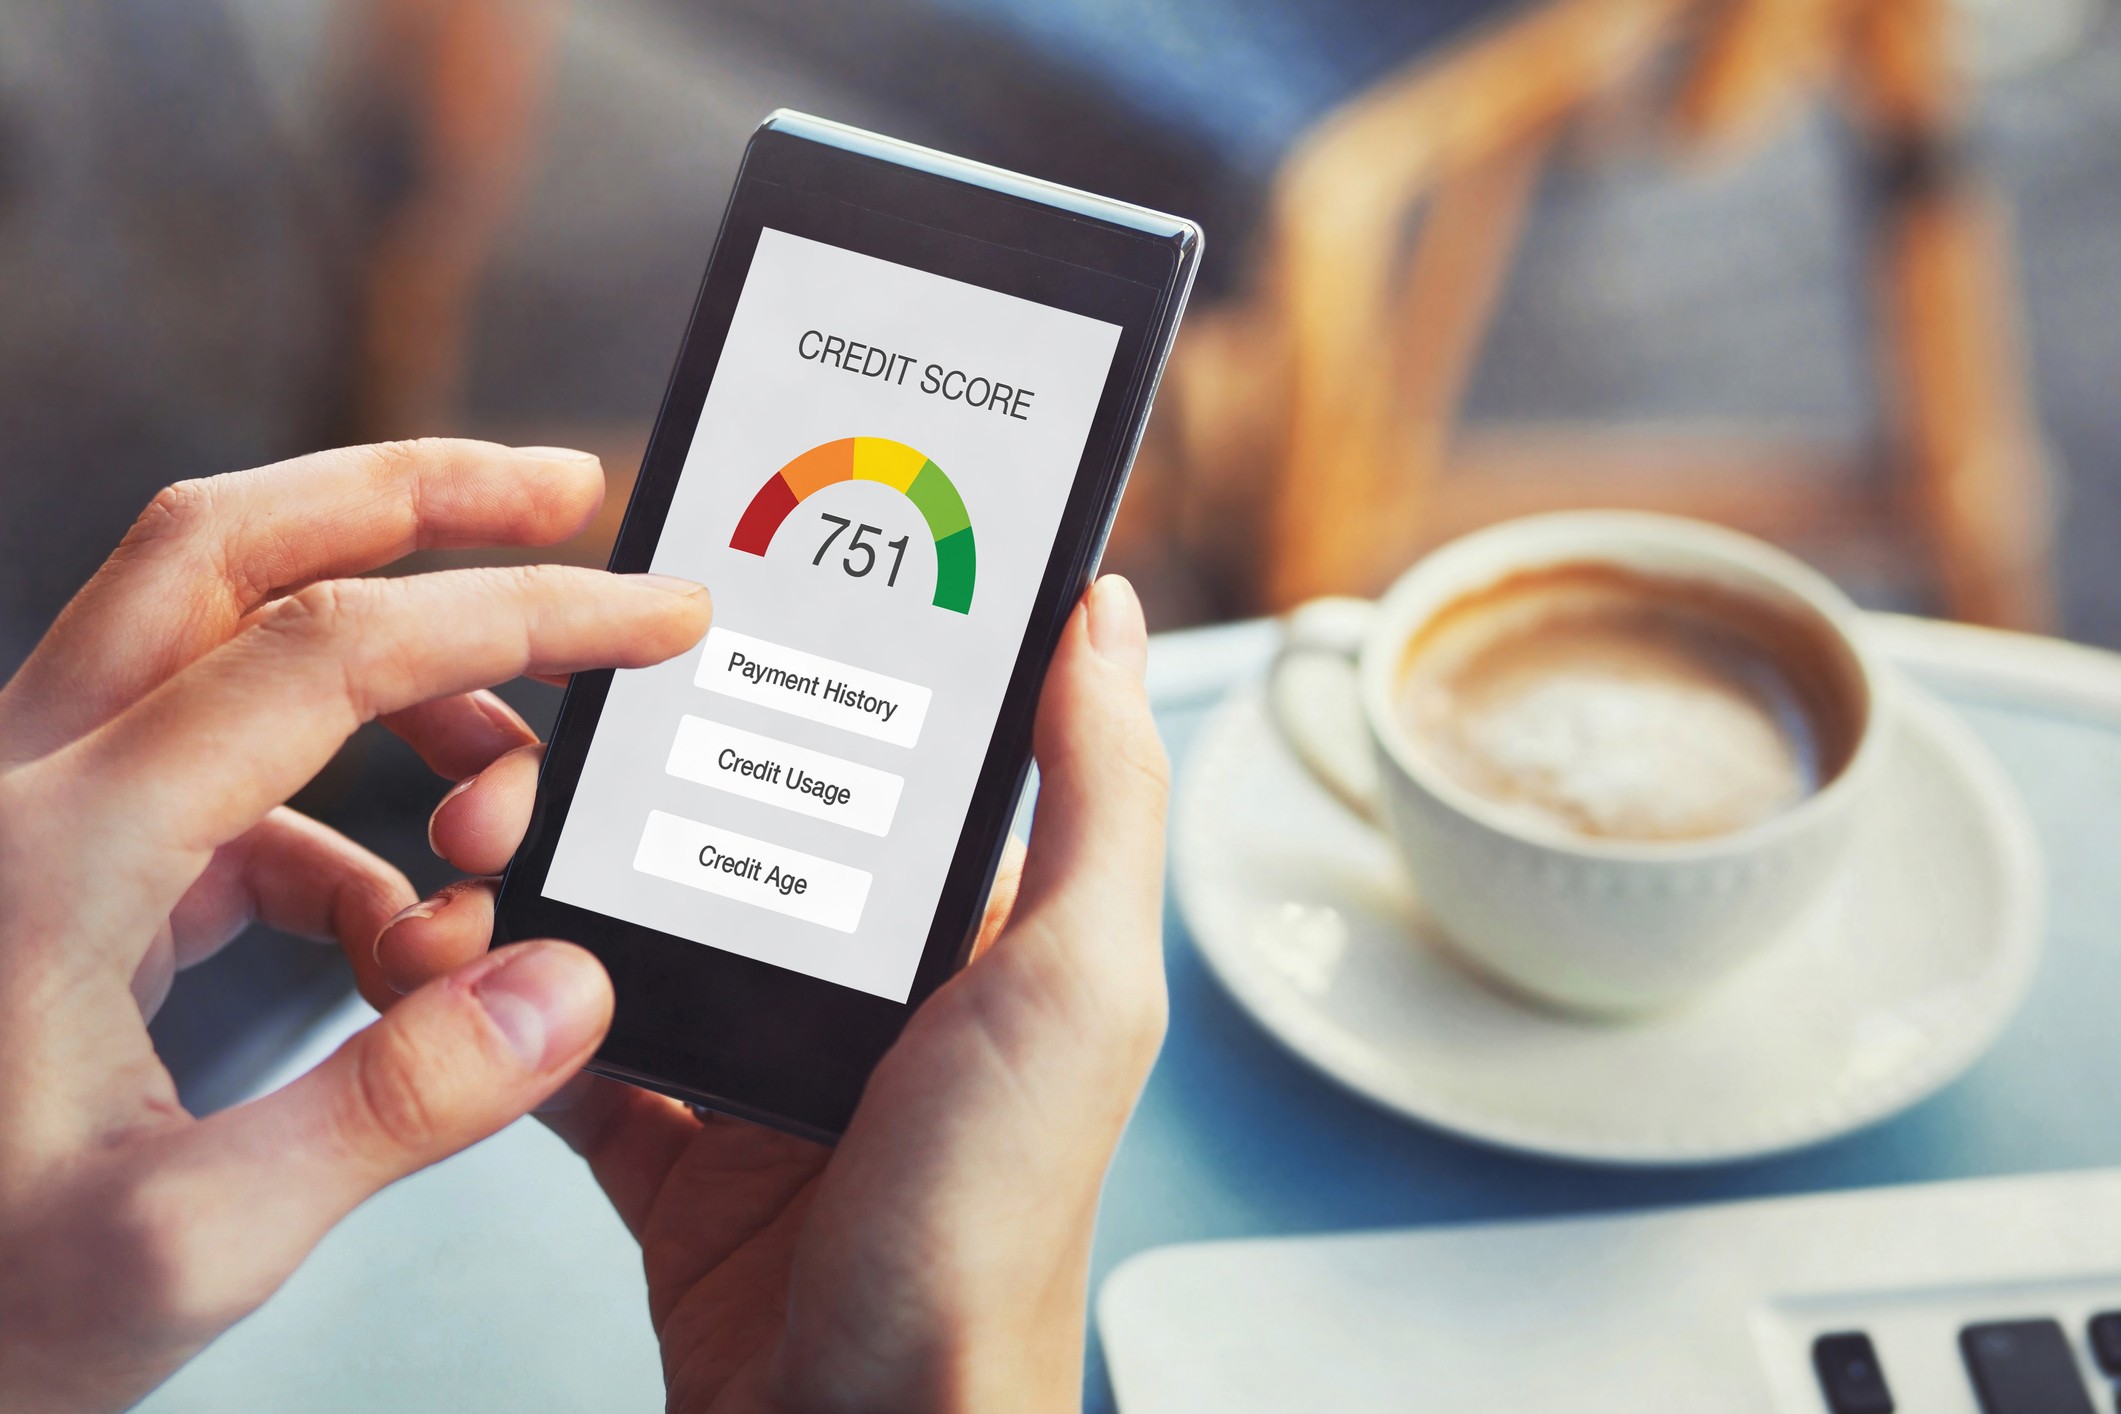 credit score shown on the screen of smartphone